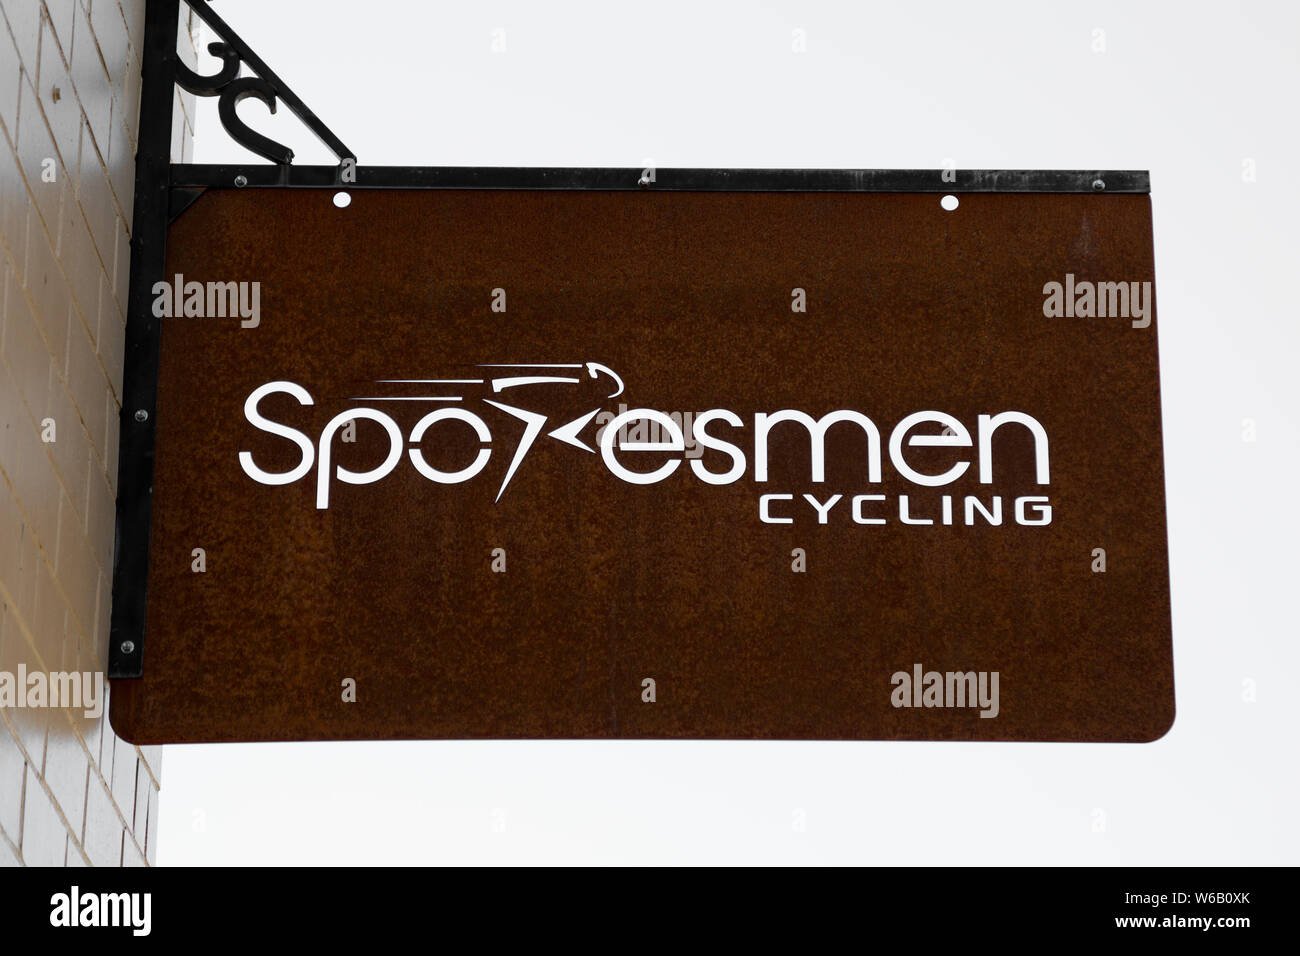 The Spokesmen Cycling bicycle shop sign in Roanoke, Indiana, USA Stock Photo